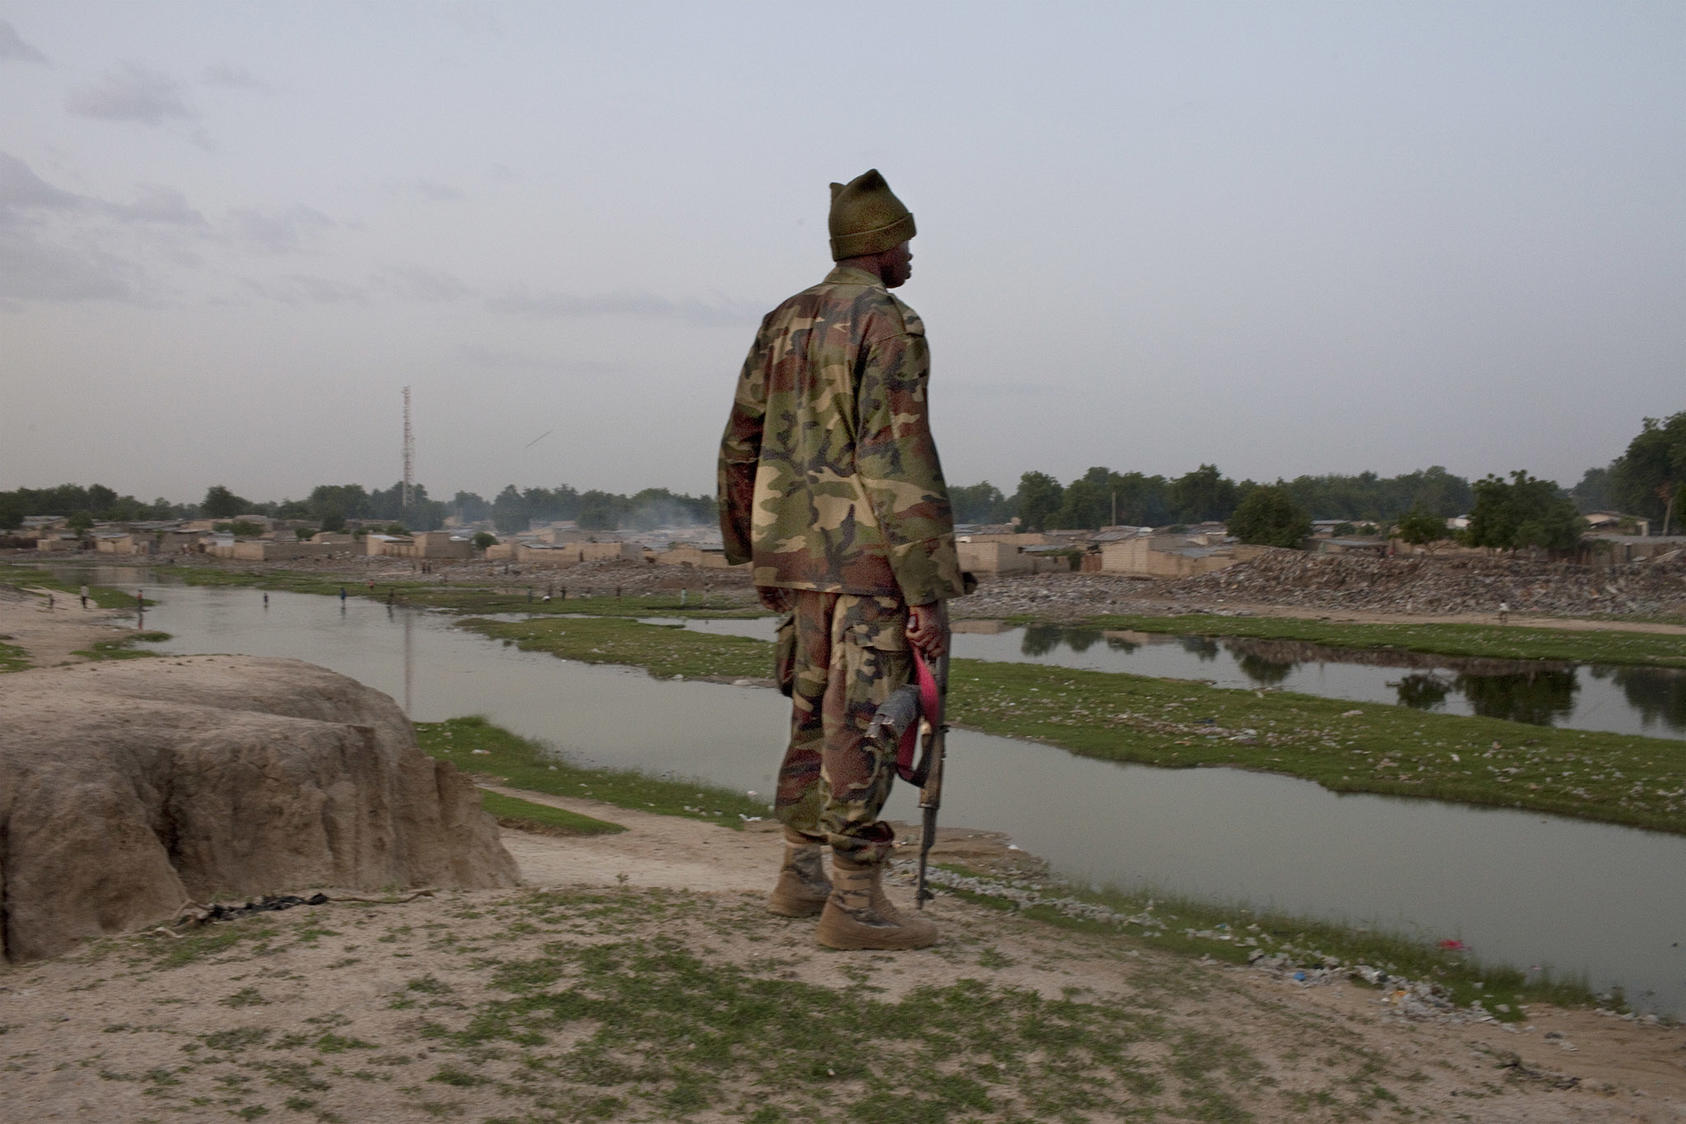 A soldier stands guard in northeastern Nigeria early in the Boko Haram insurgency. Nigeria’s responses to violent conflict have focused on military and police operations, with less focus on prevention efforts. (Samuel James/The New York Times)